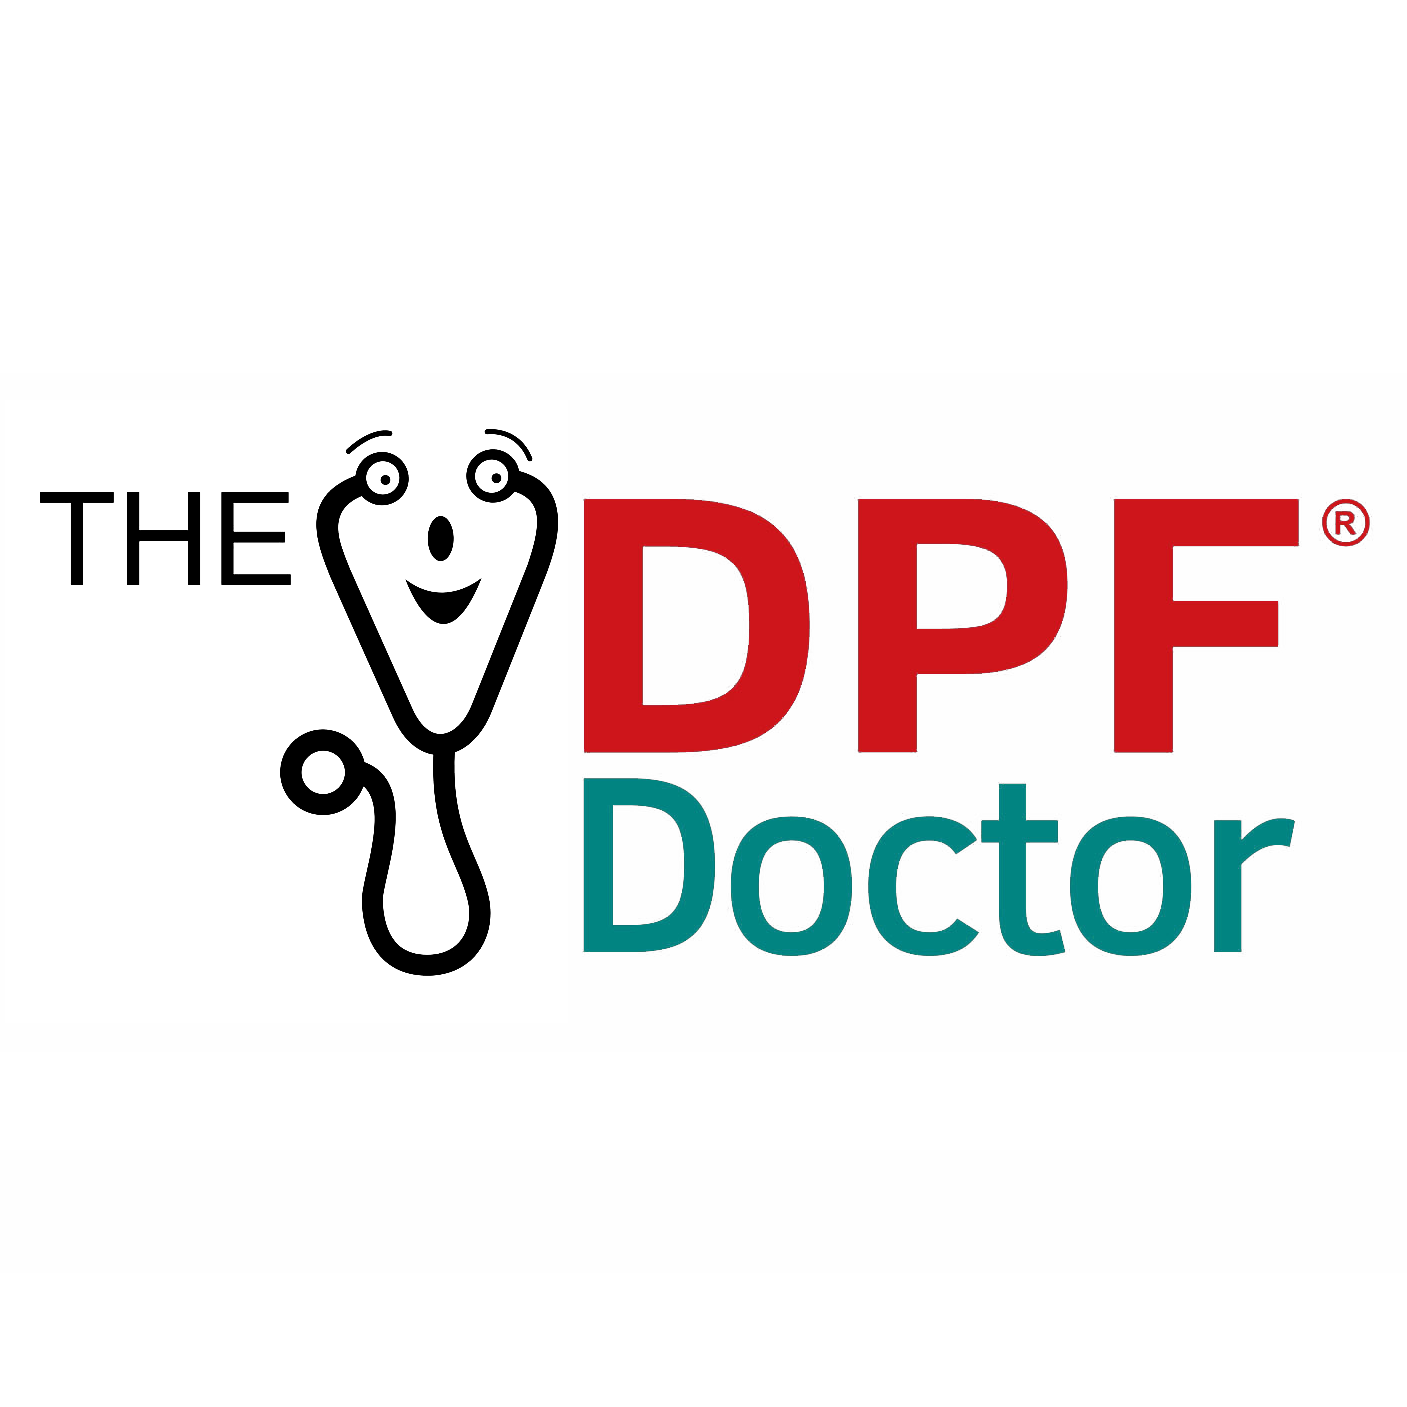 The DPF Doctor Accredited Member